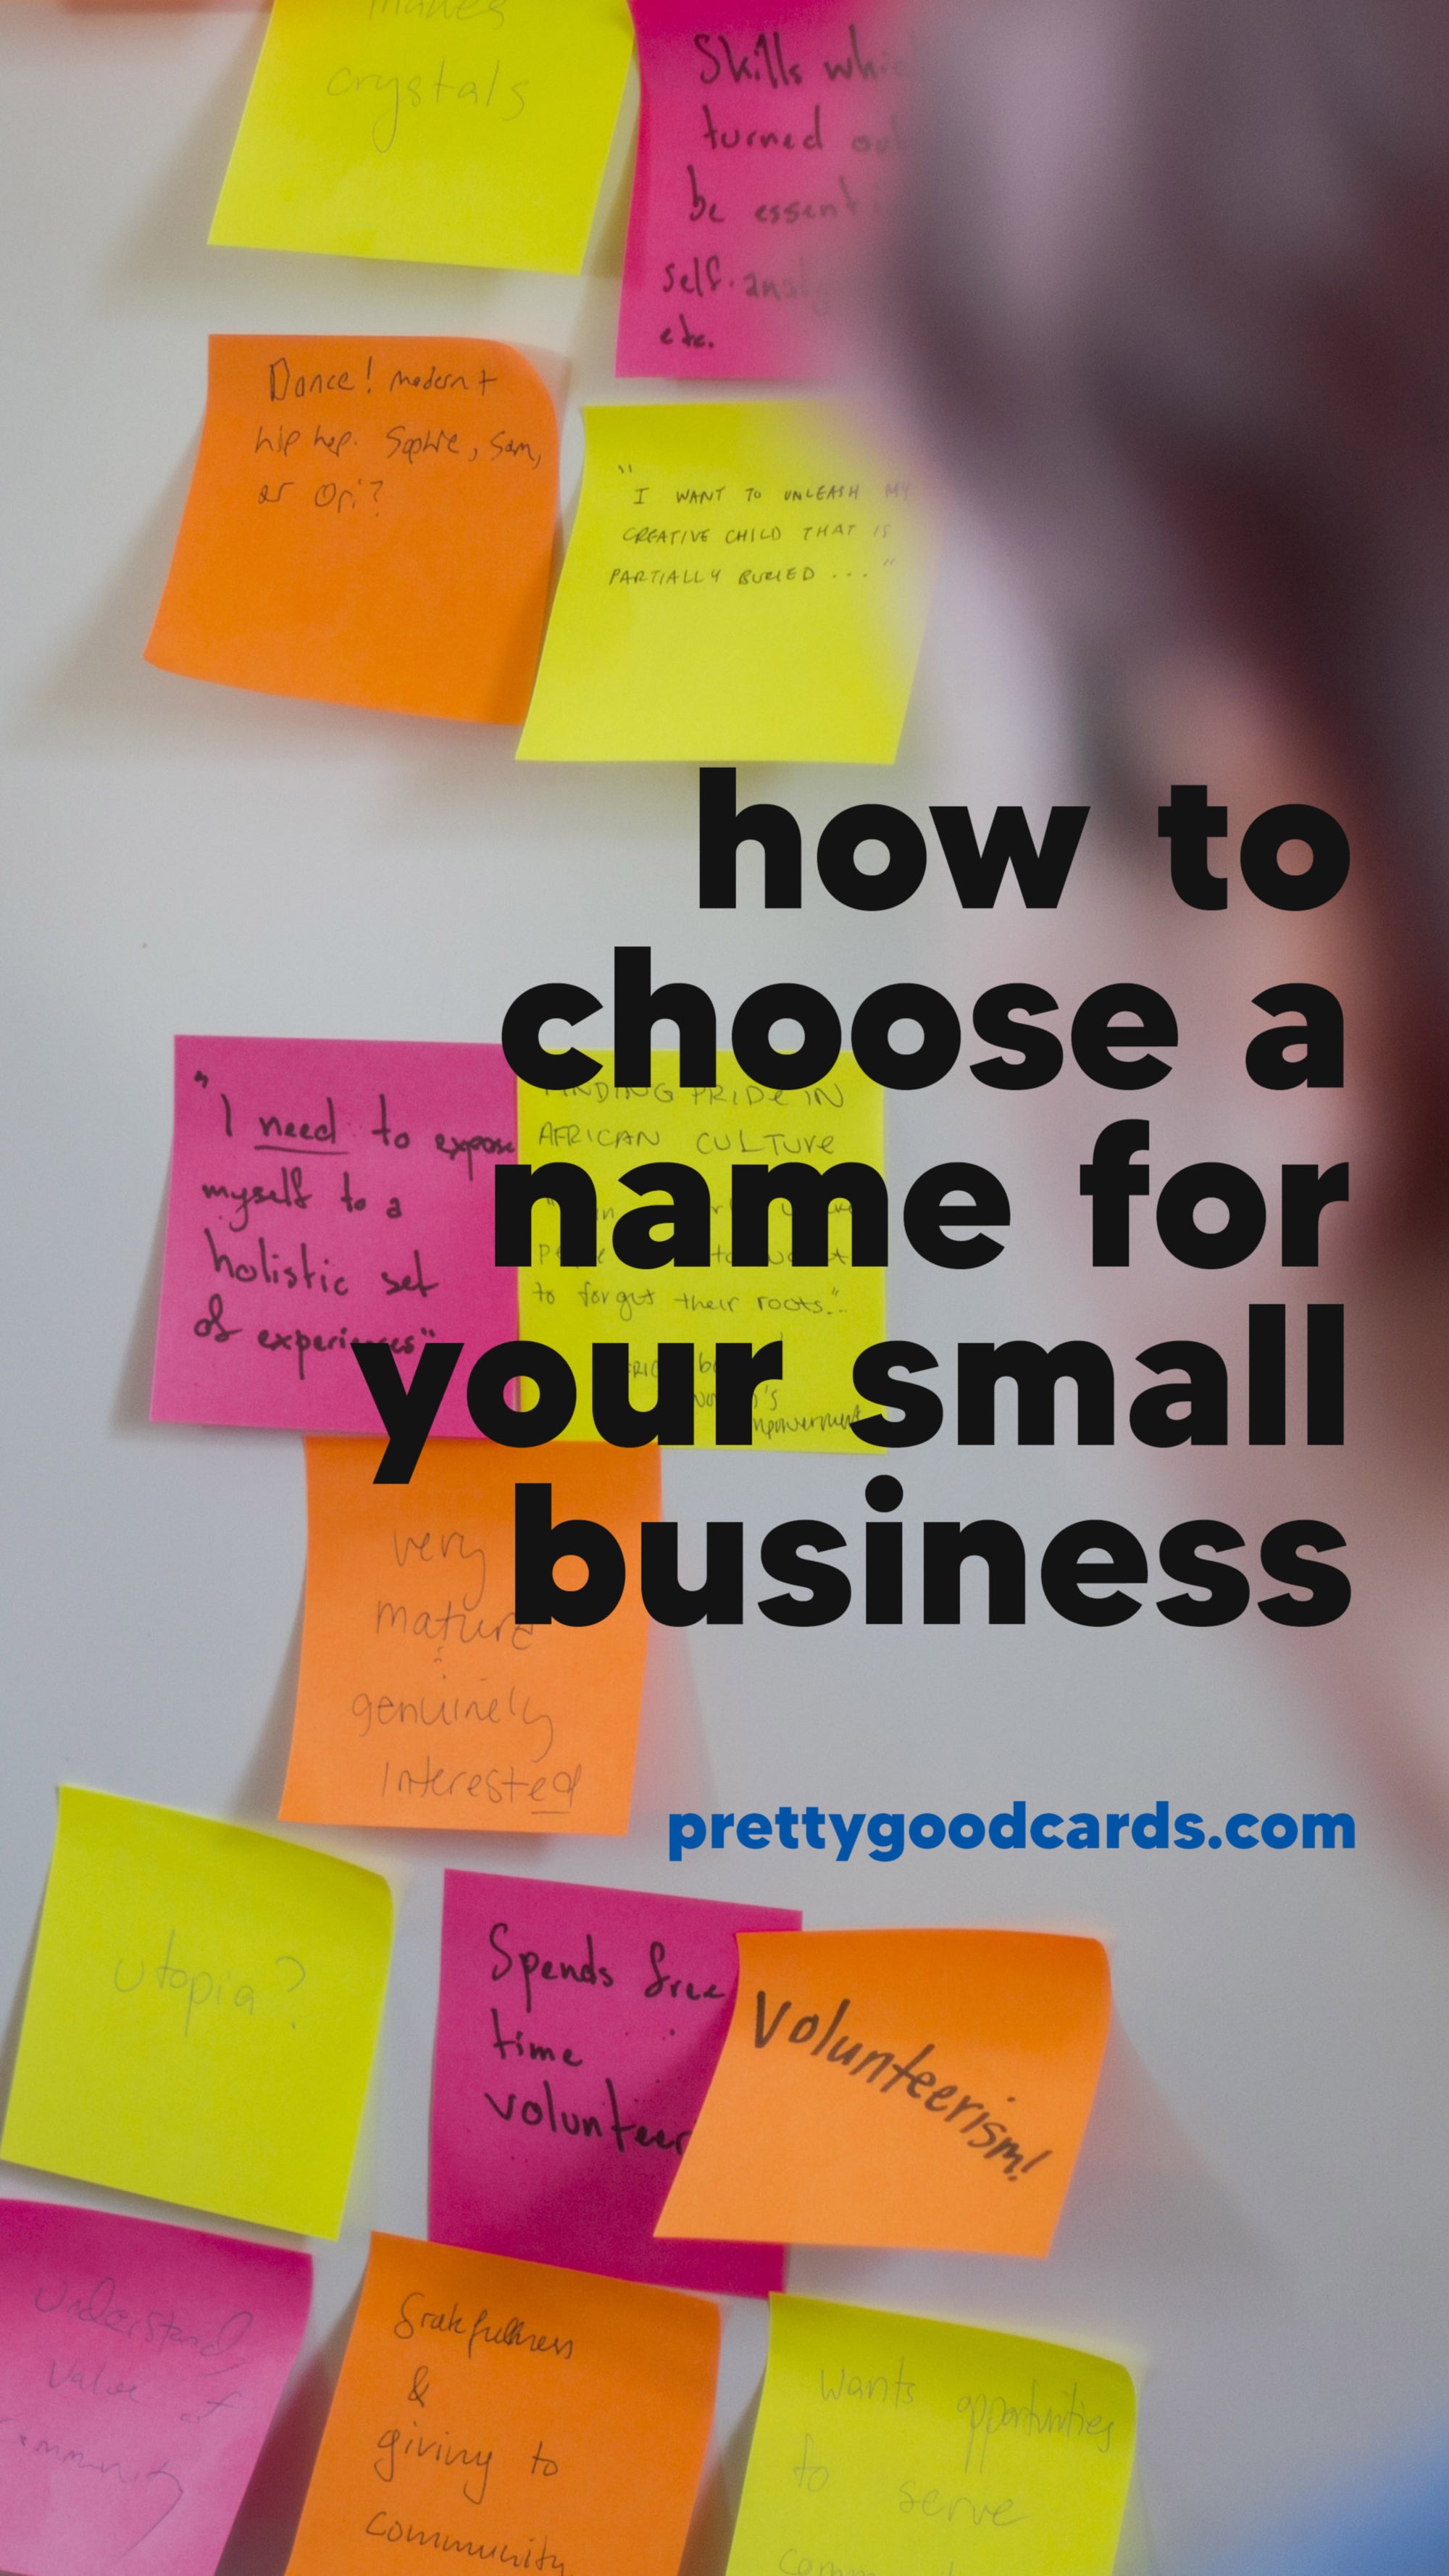 How To Choose a Name for Your Small Business